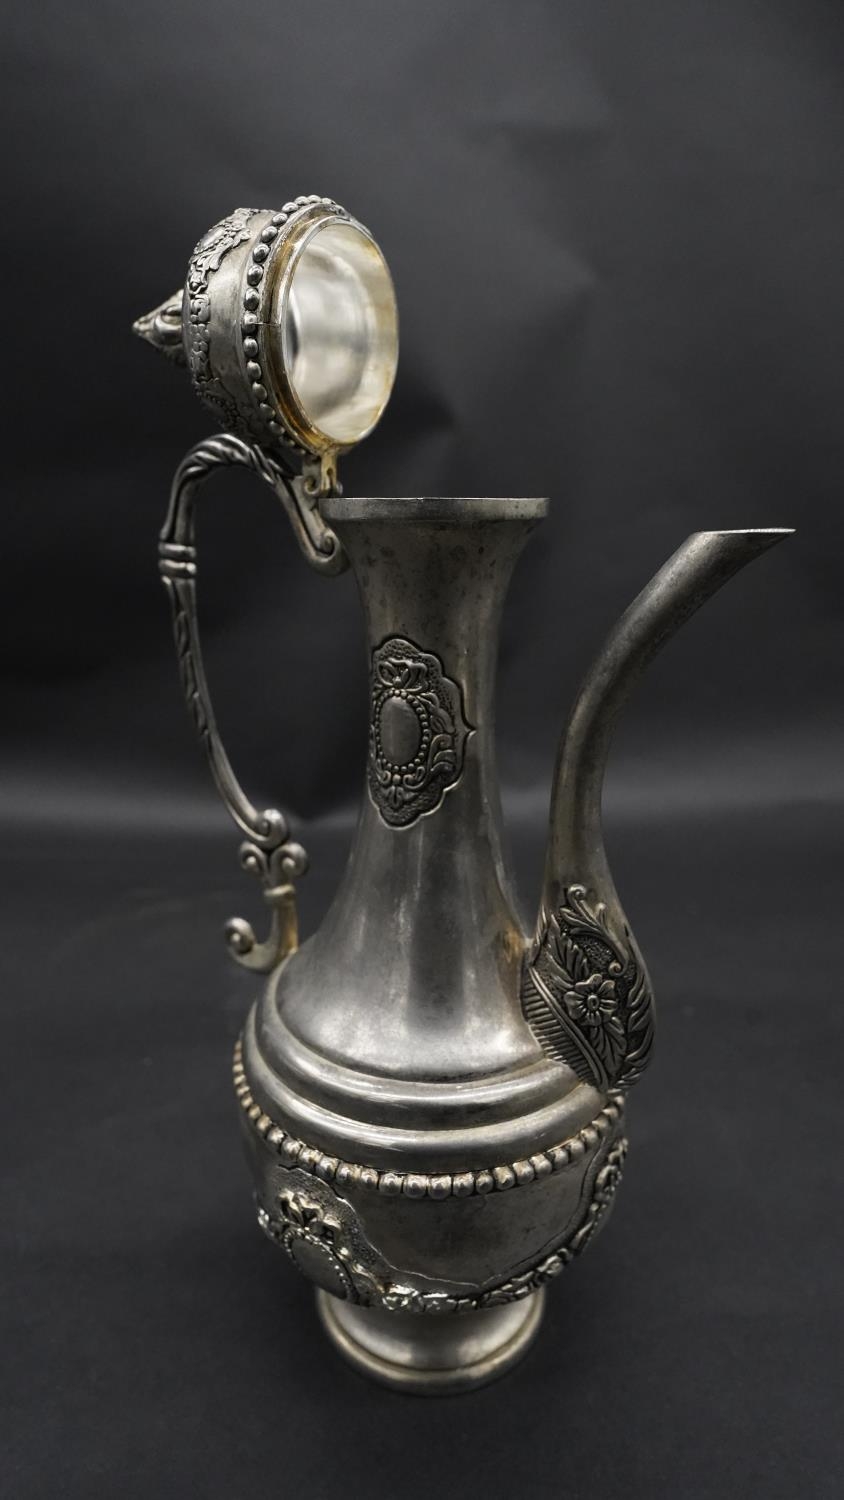 A silver plate relief swag and floral design three piece Islamic coffee set, with coffee jug, - Image 4 of 11